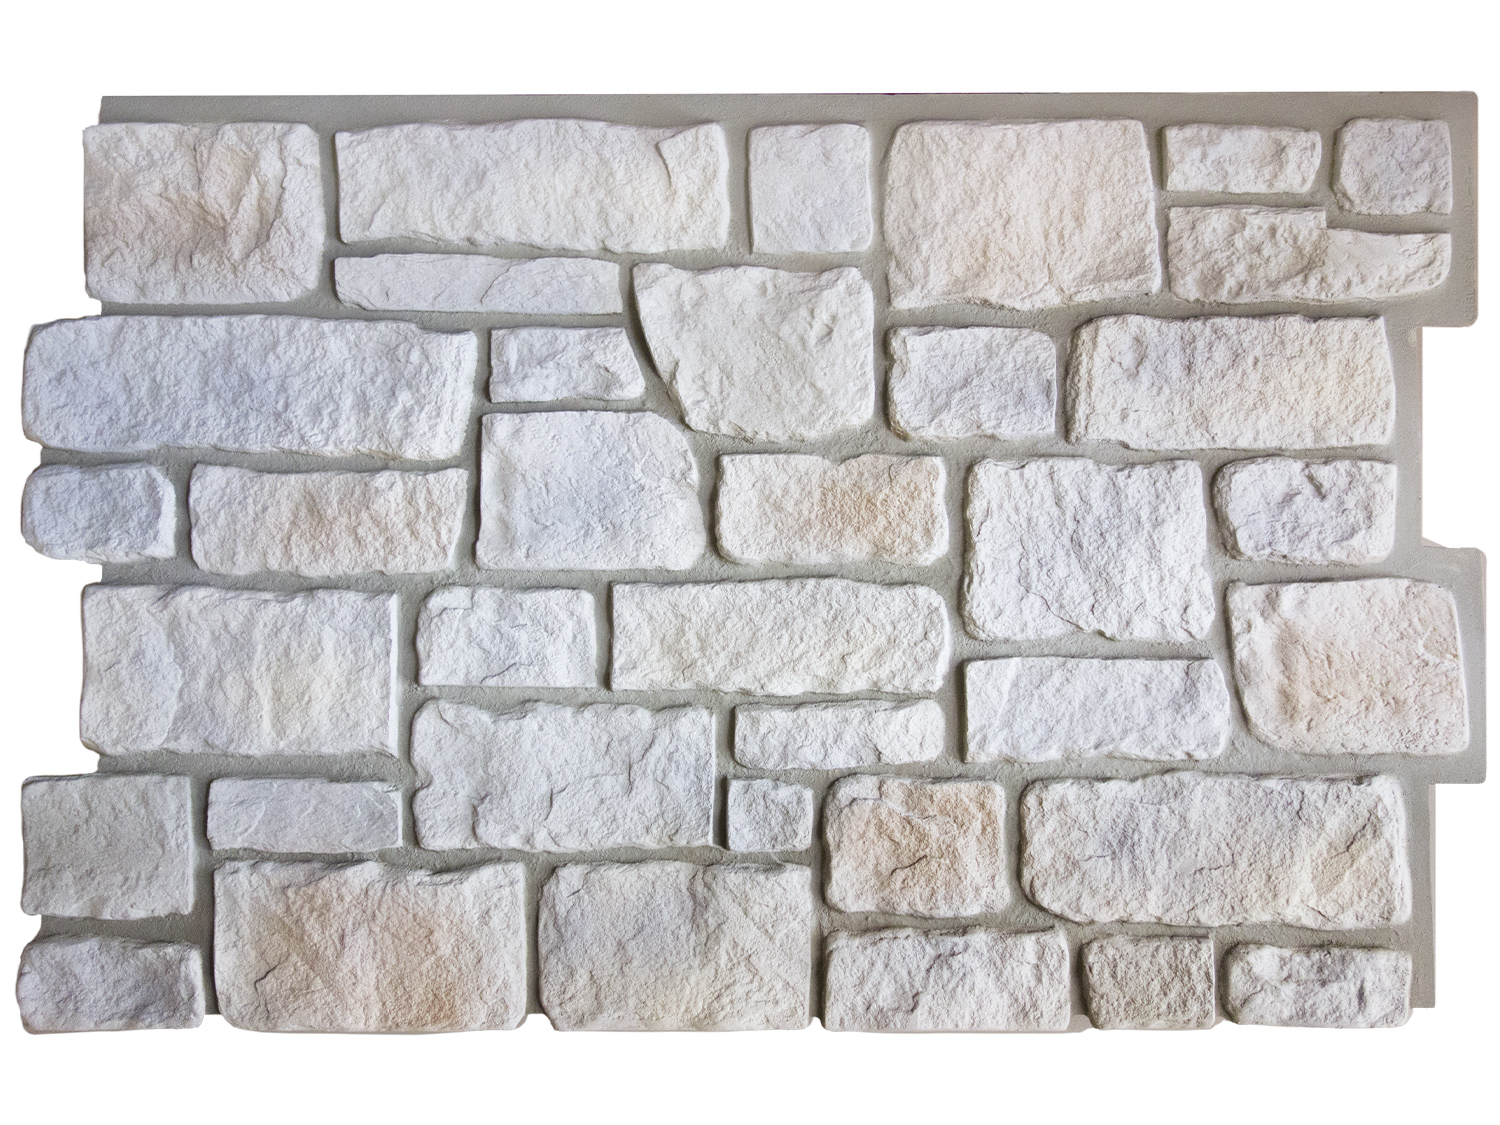 What is the size of a Hampton Cobblestone panel?